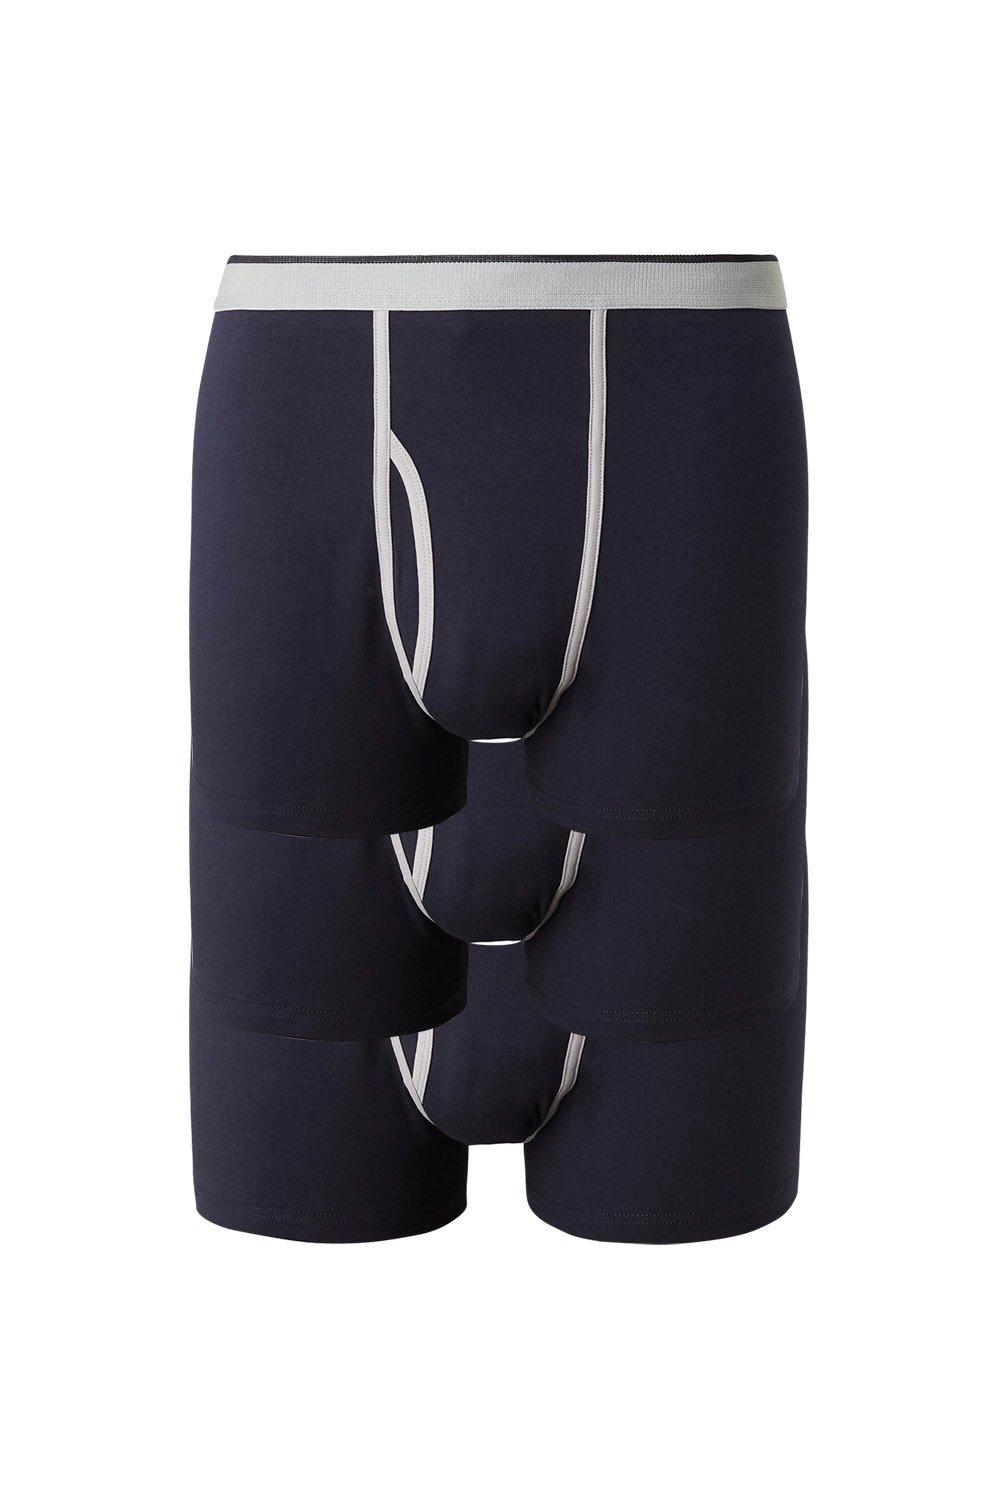 3 Pack Contrast Trunks